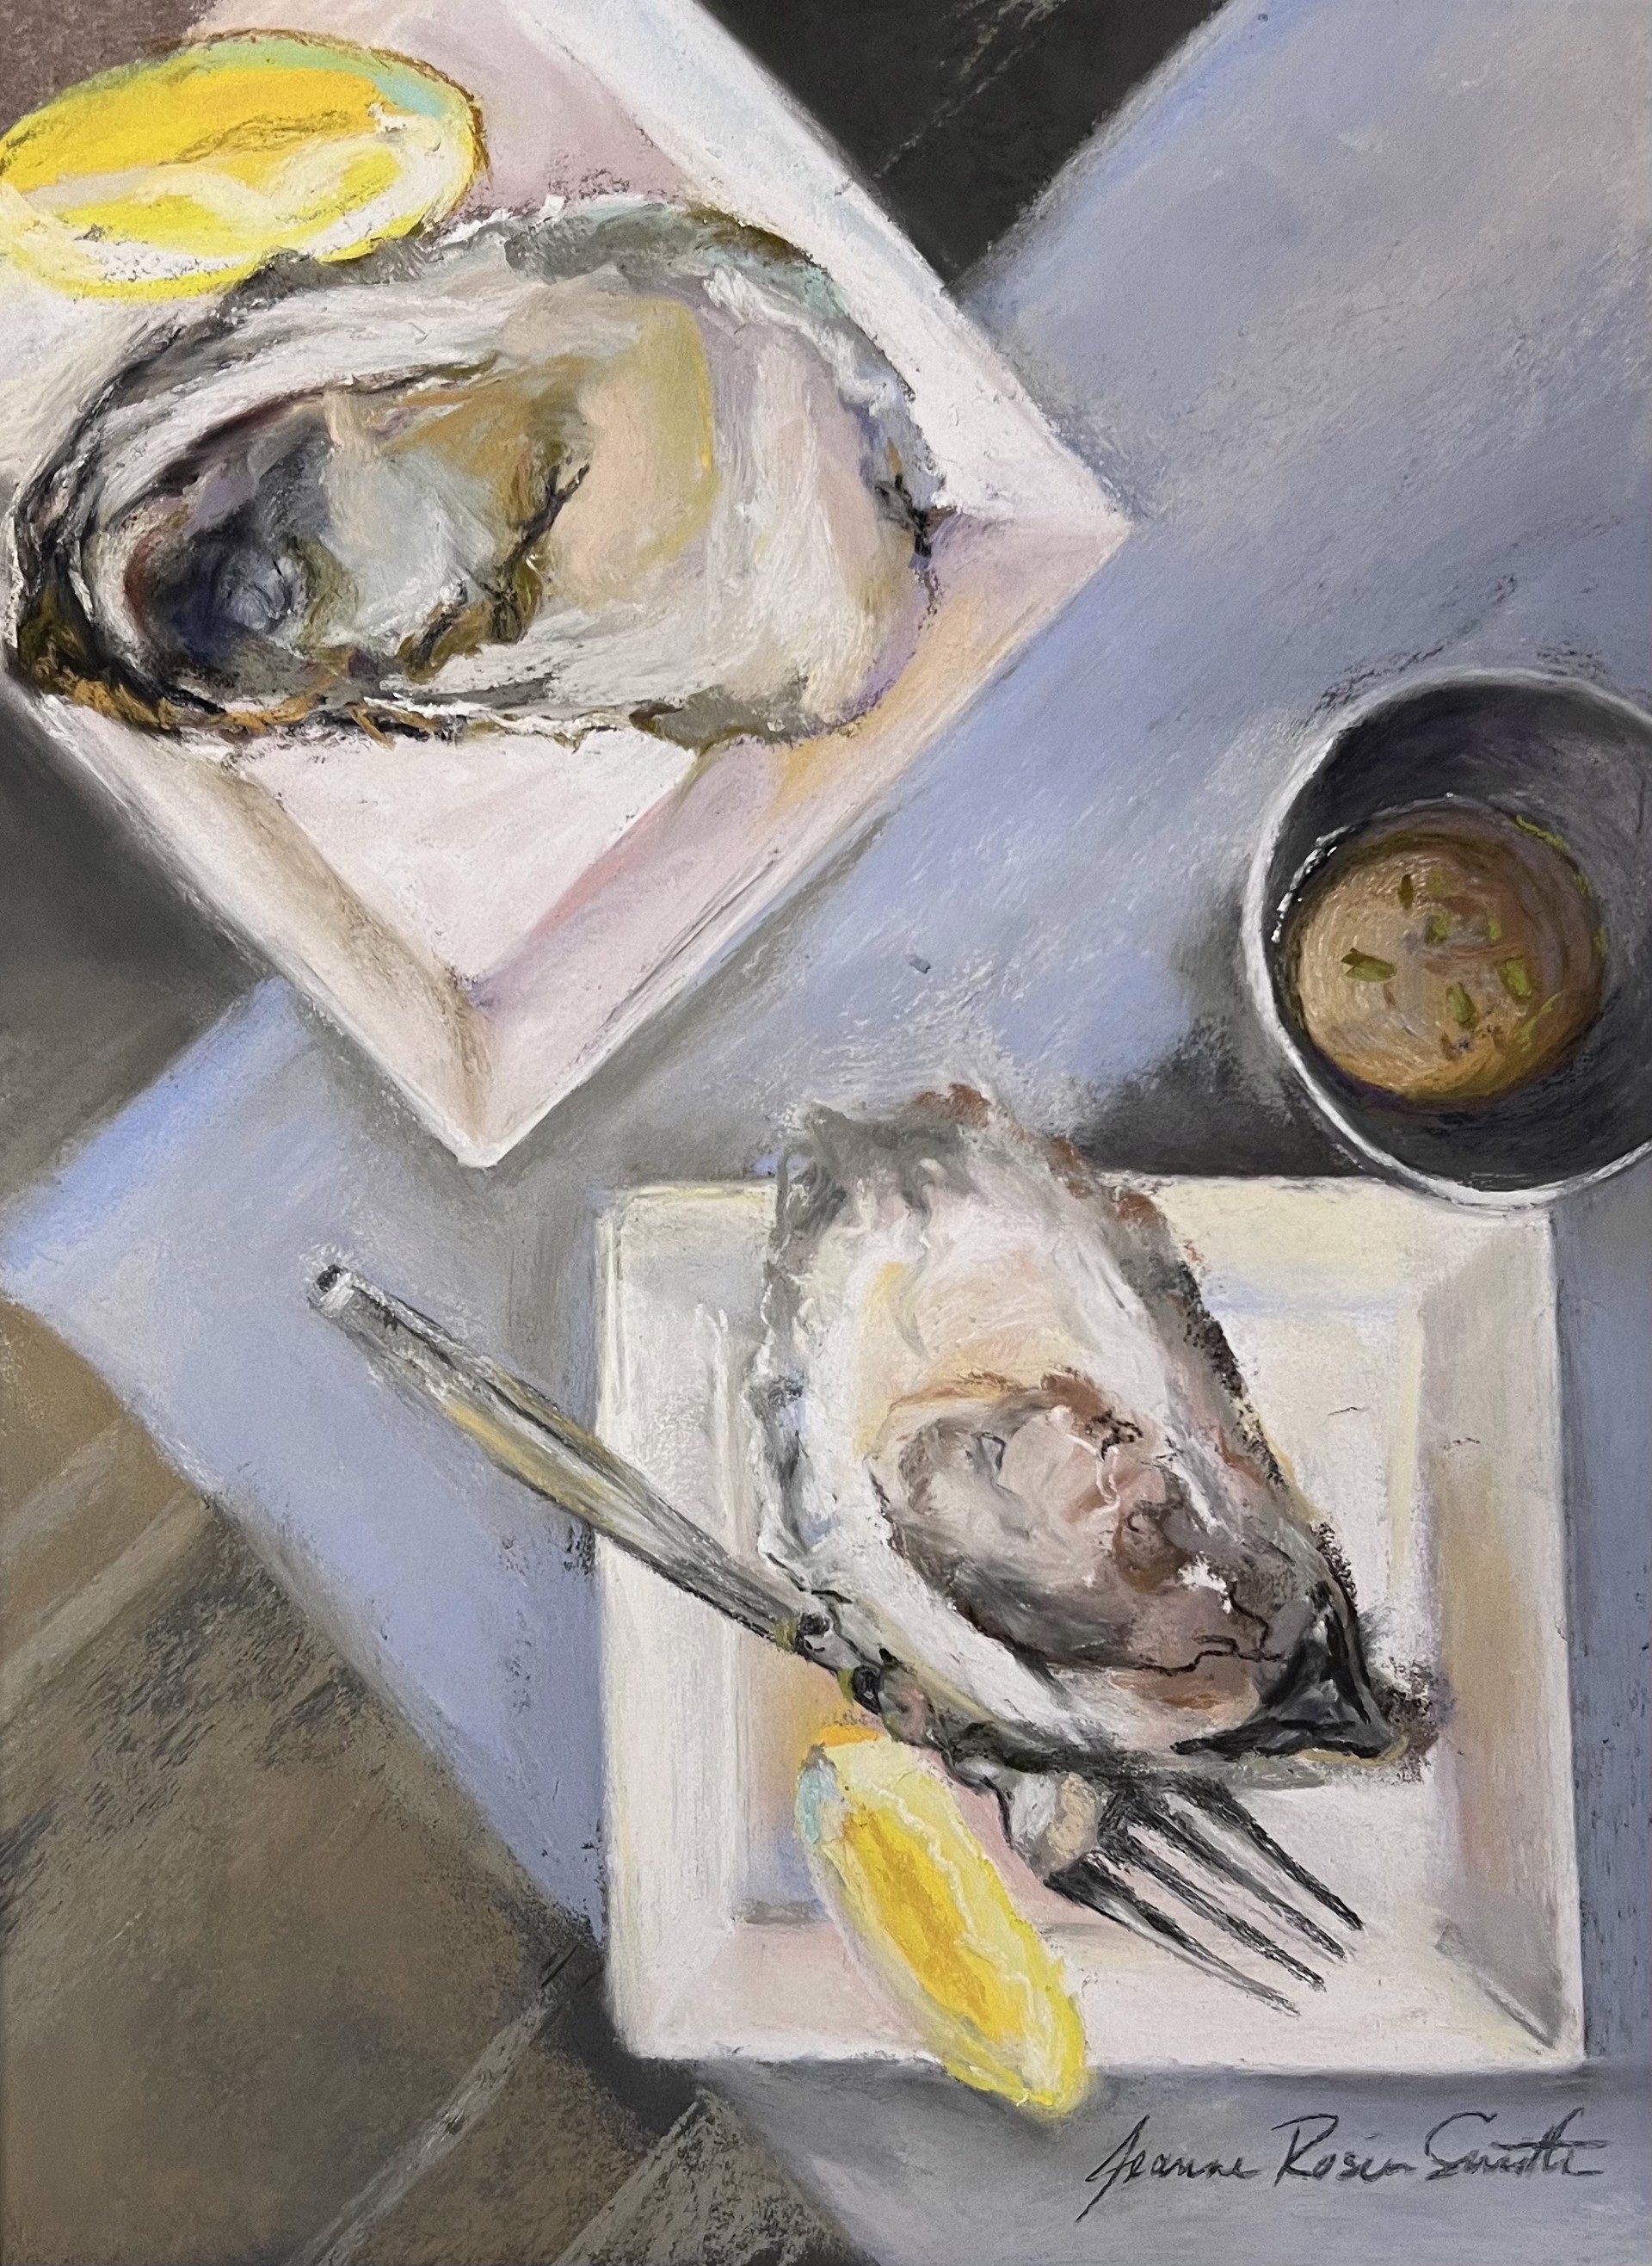 Oysters for Two by JEANNE ROSIER SMITH